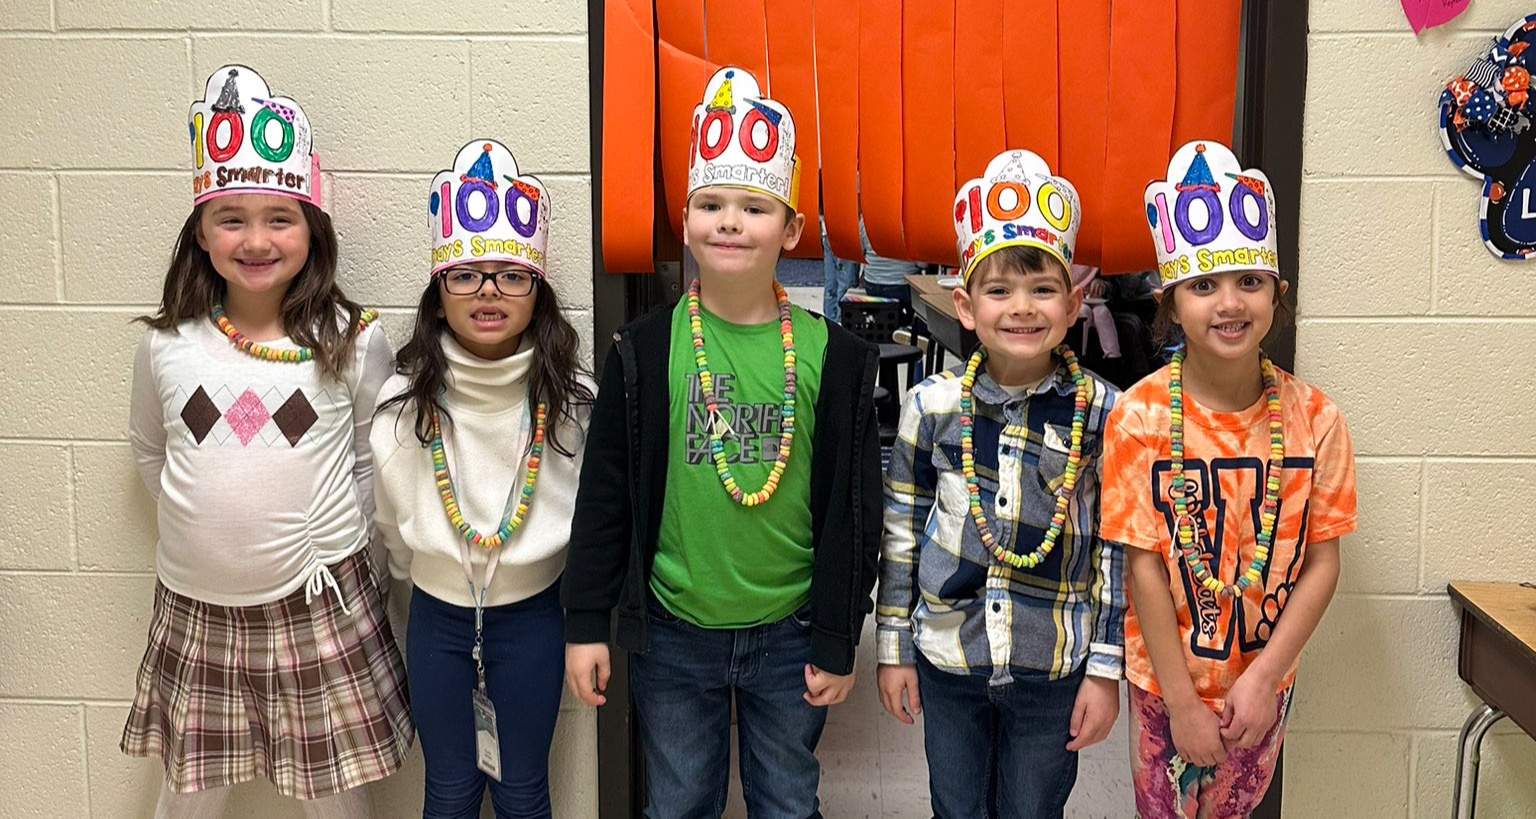 Five students pose in the 100 day crowns they colored.